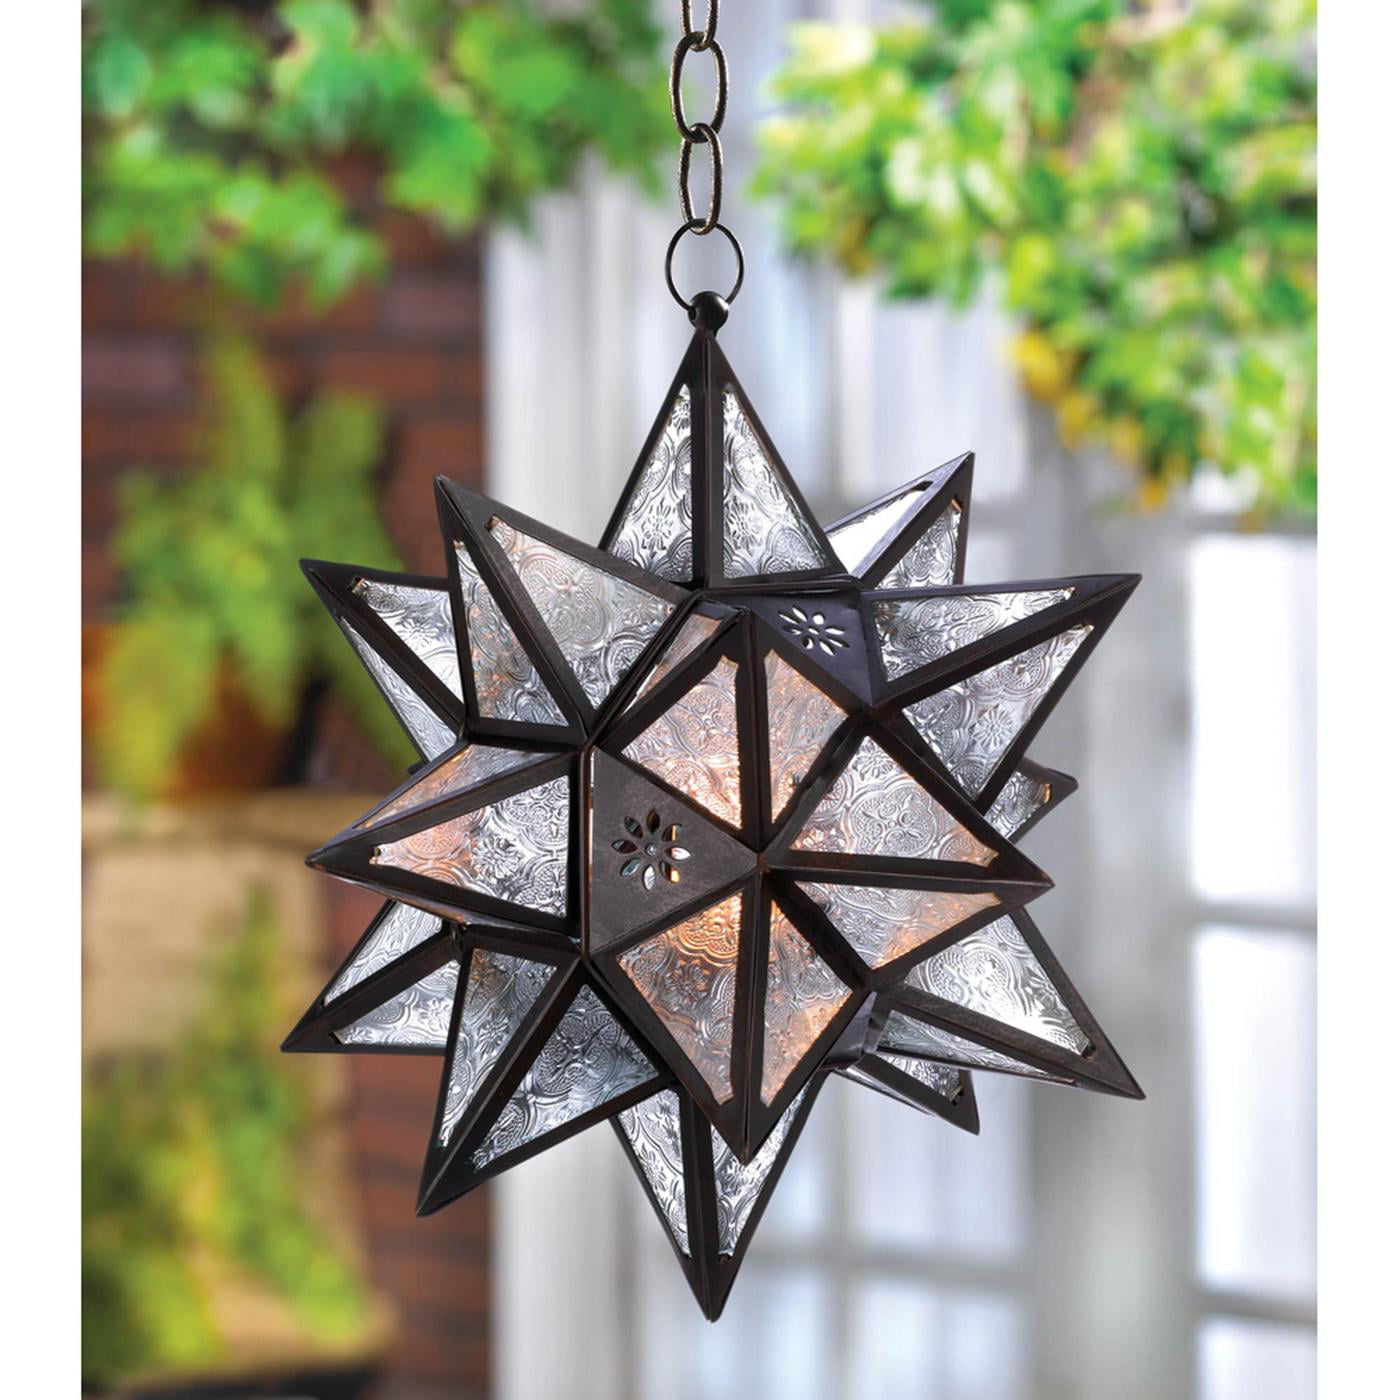 Details about   Moroccan Style Hanging Metal Star Candle Holder Lantern for Home Party Decor 